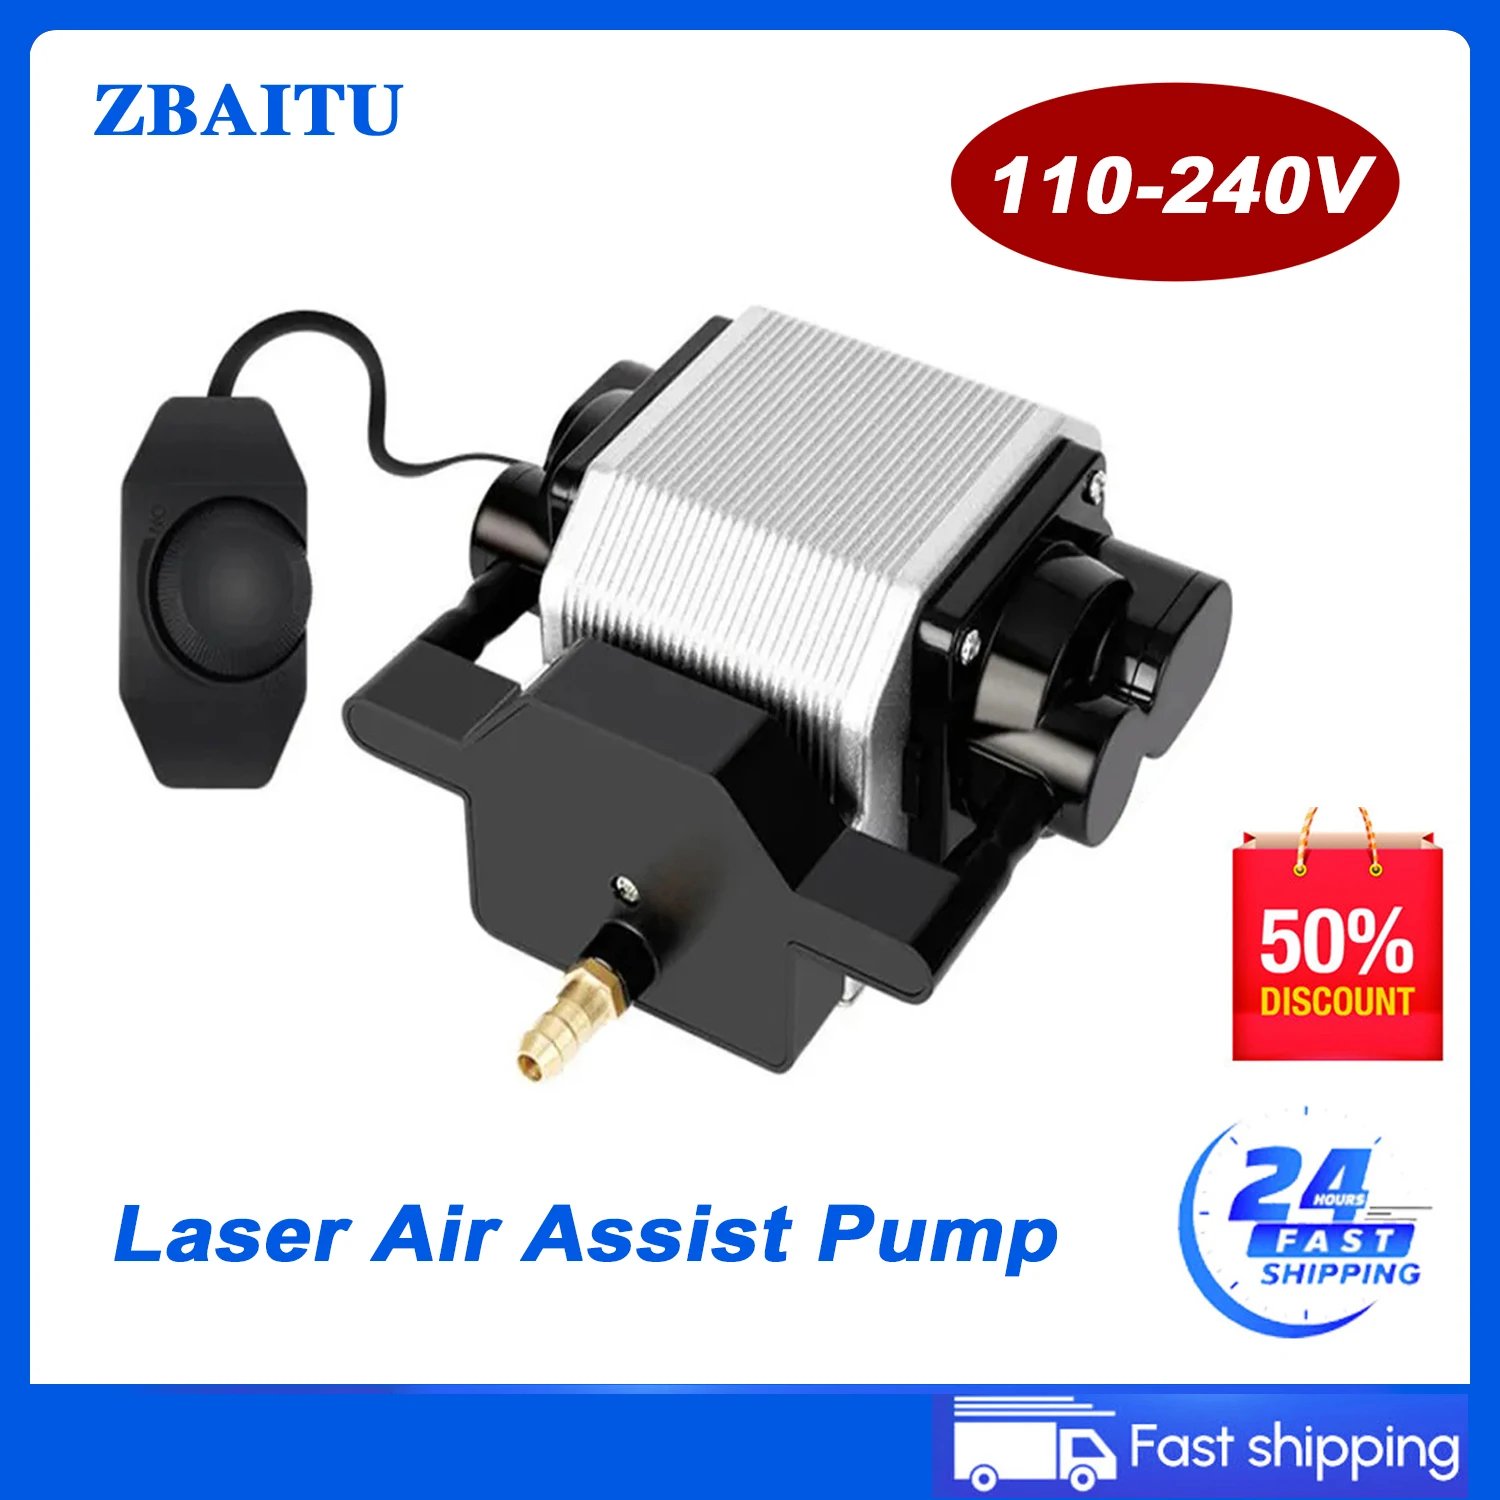 

Air Assist Pump Compressor Kit Tools for All Laser Cutter and Engraver Adjustable 30L/Min for CNC Cutting Engraving Machines